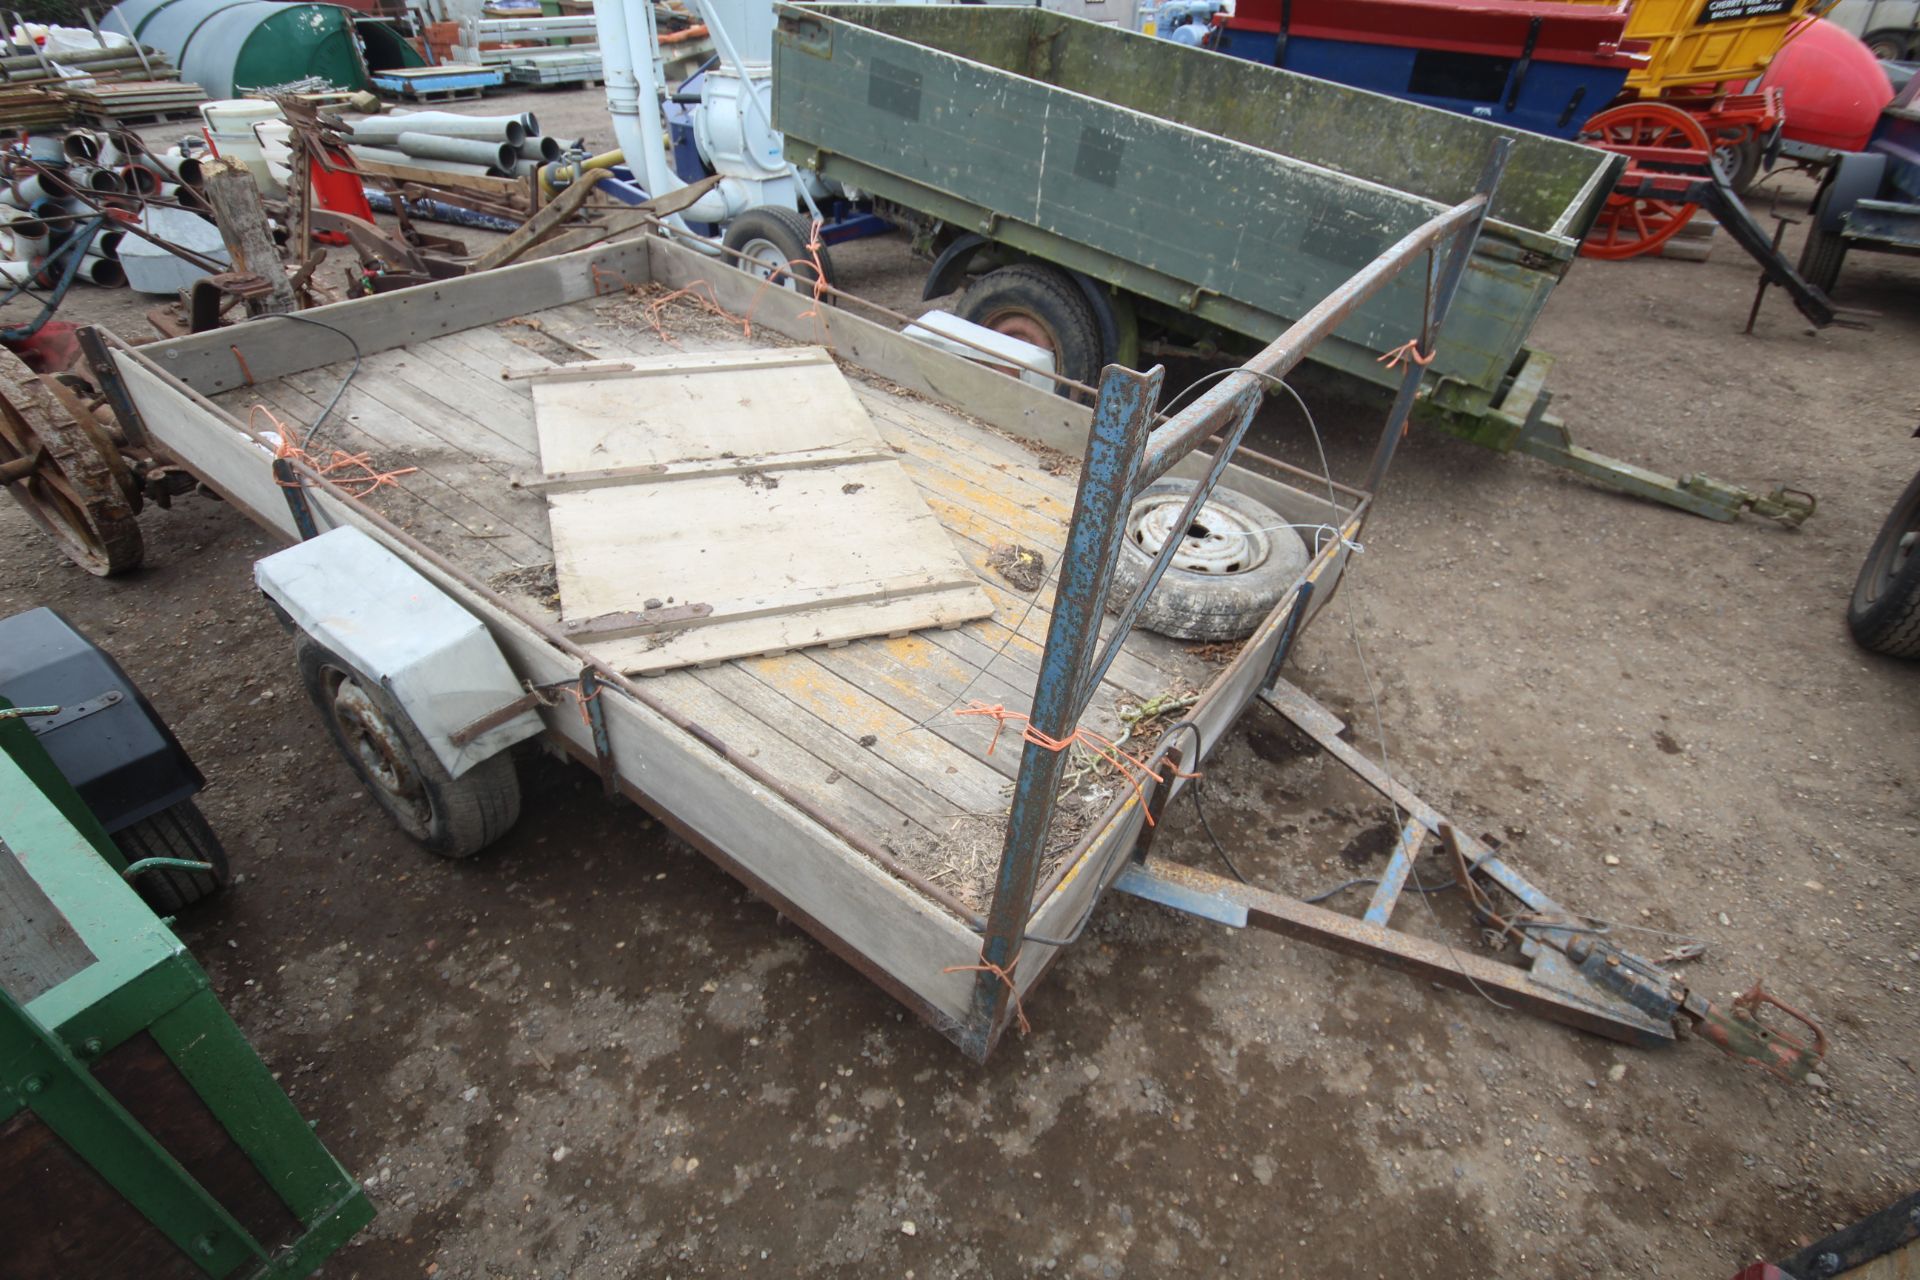 Single axle car trailer. For sale due to retirement. V